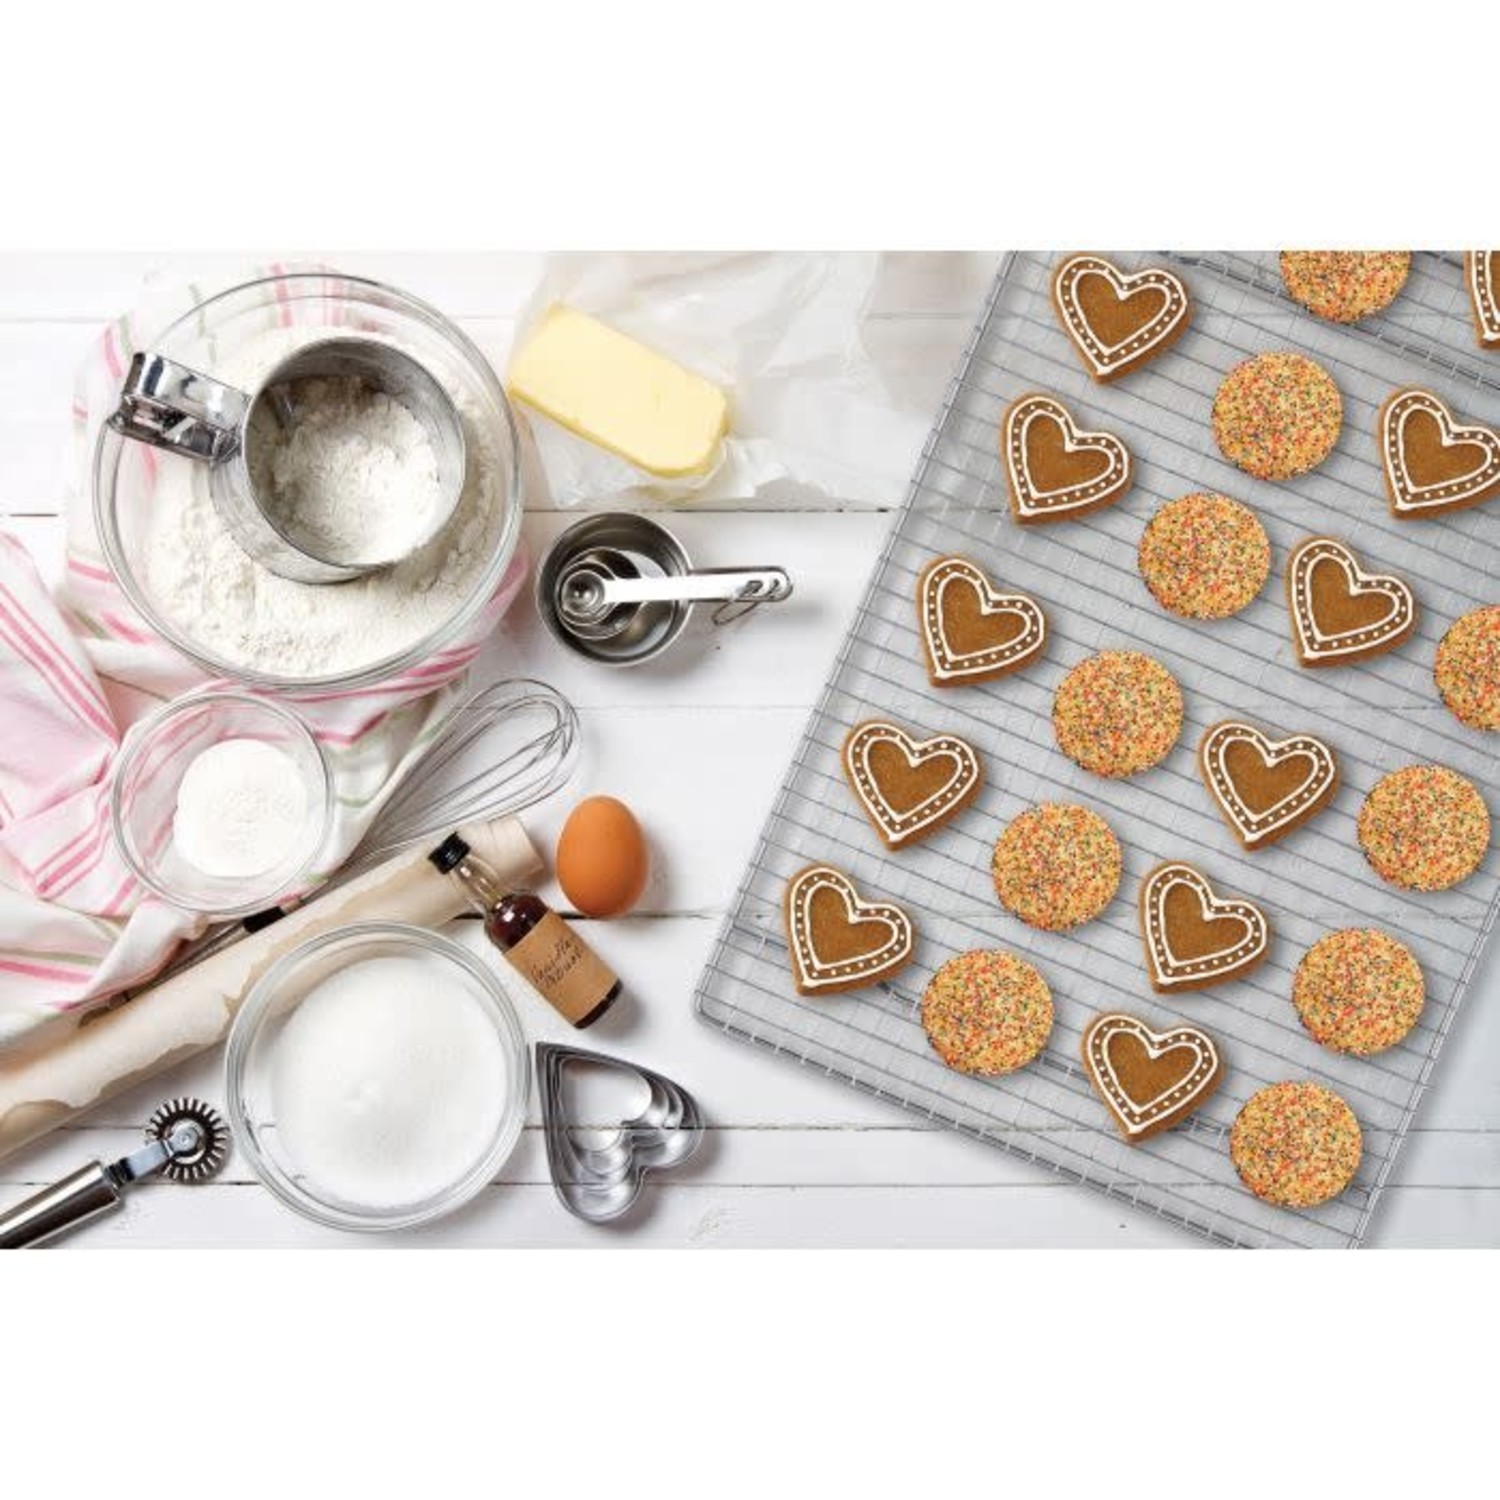 Nordic Ware Copper-Plated Cooling Rack (Set of 2) for Baking and